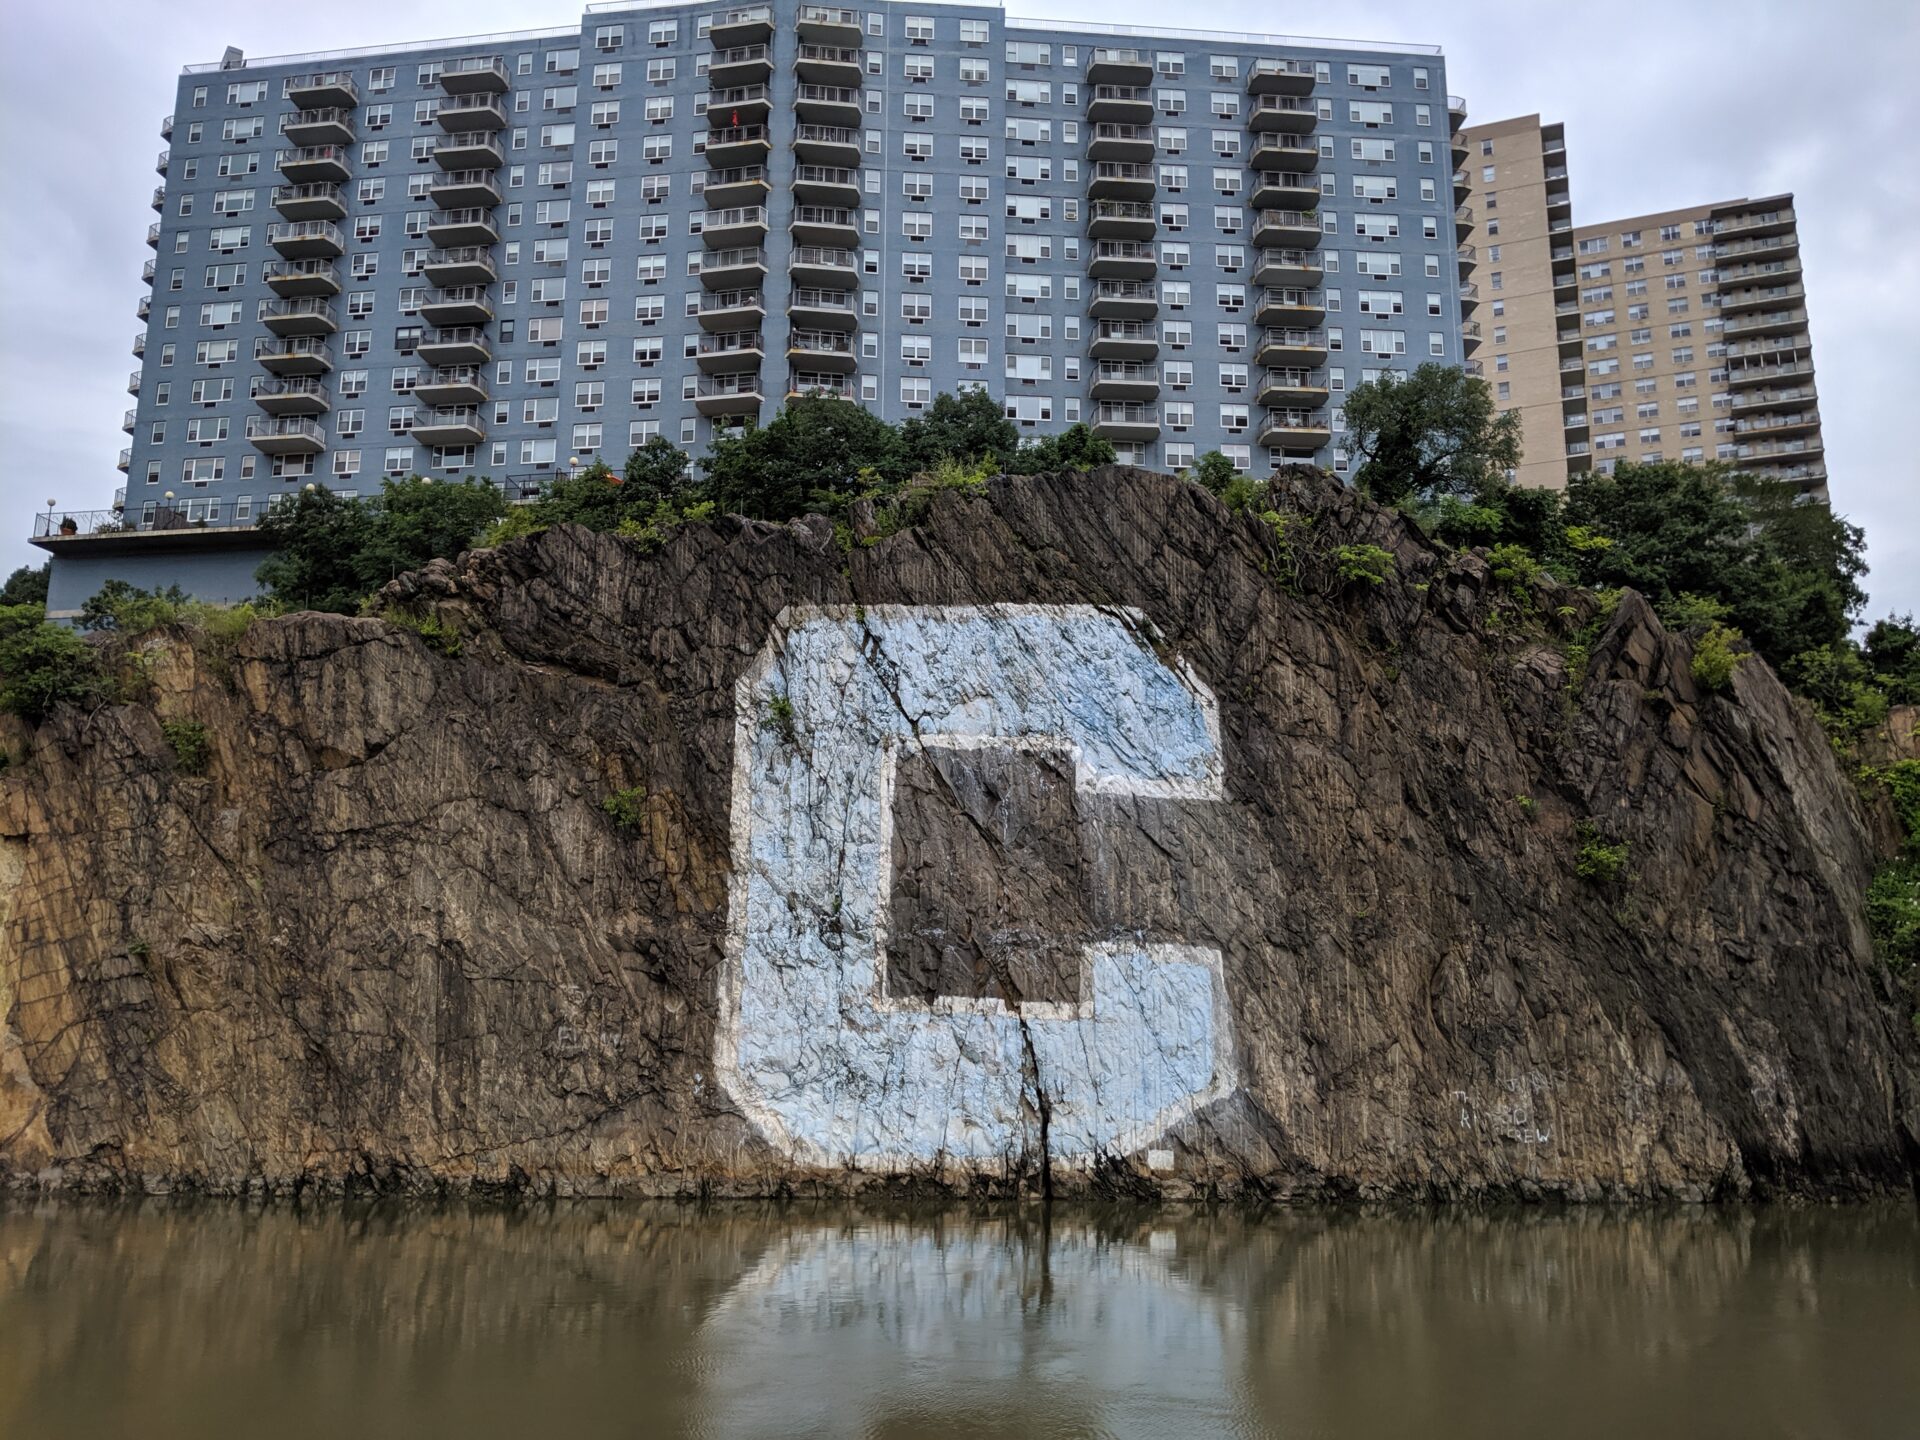 Large blue C letter on a side of a cliff over muddy water